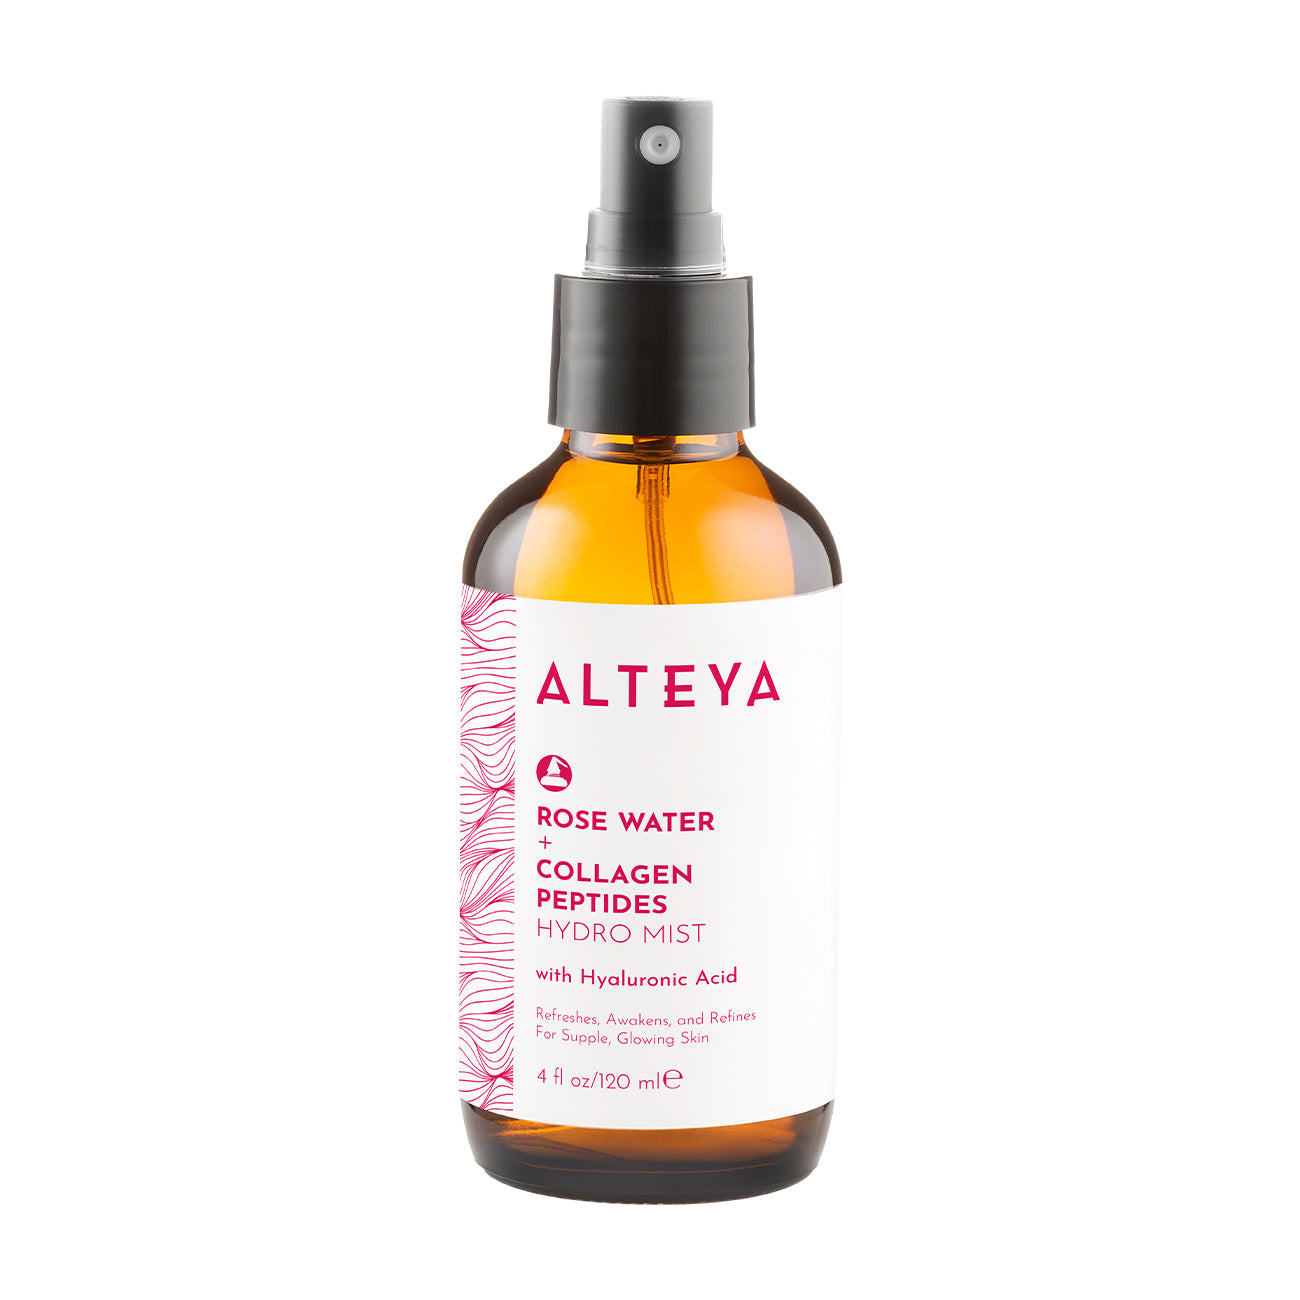 A bottle of Alteya Organics' Rose Water Face Toner with Collagen Peptides and Hyaluronic Acid, perfect for sensitive skin.